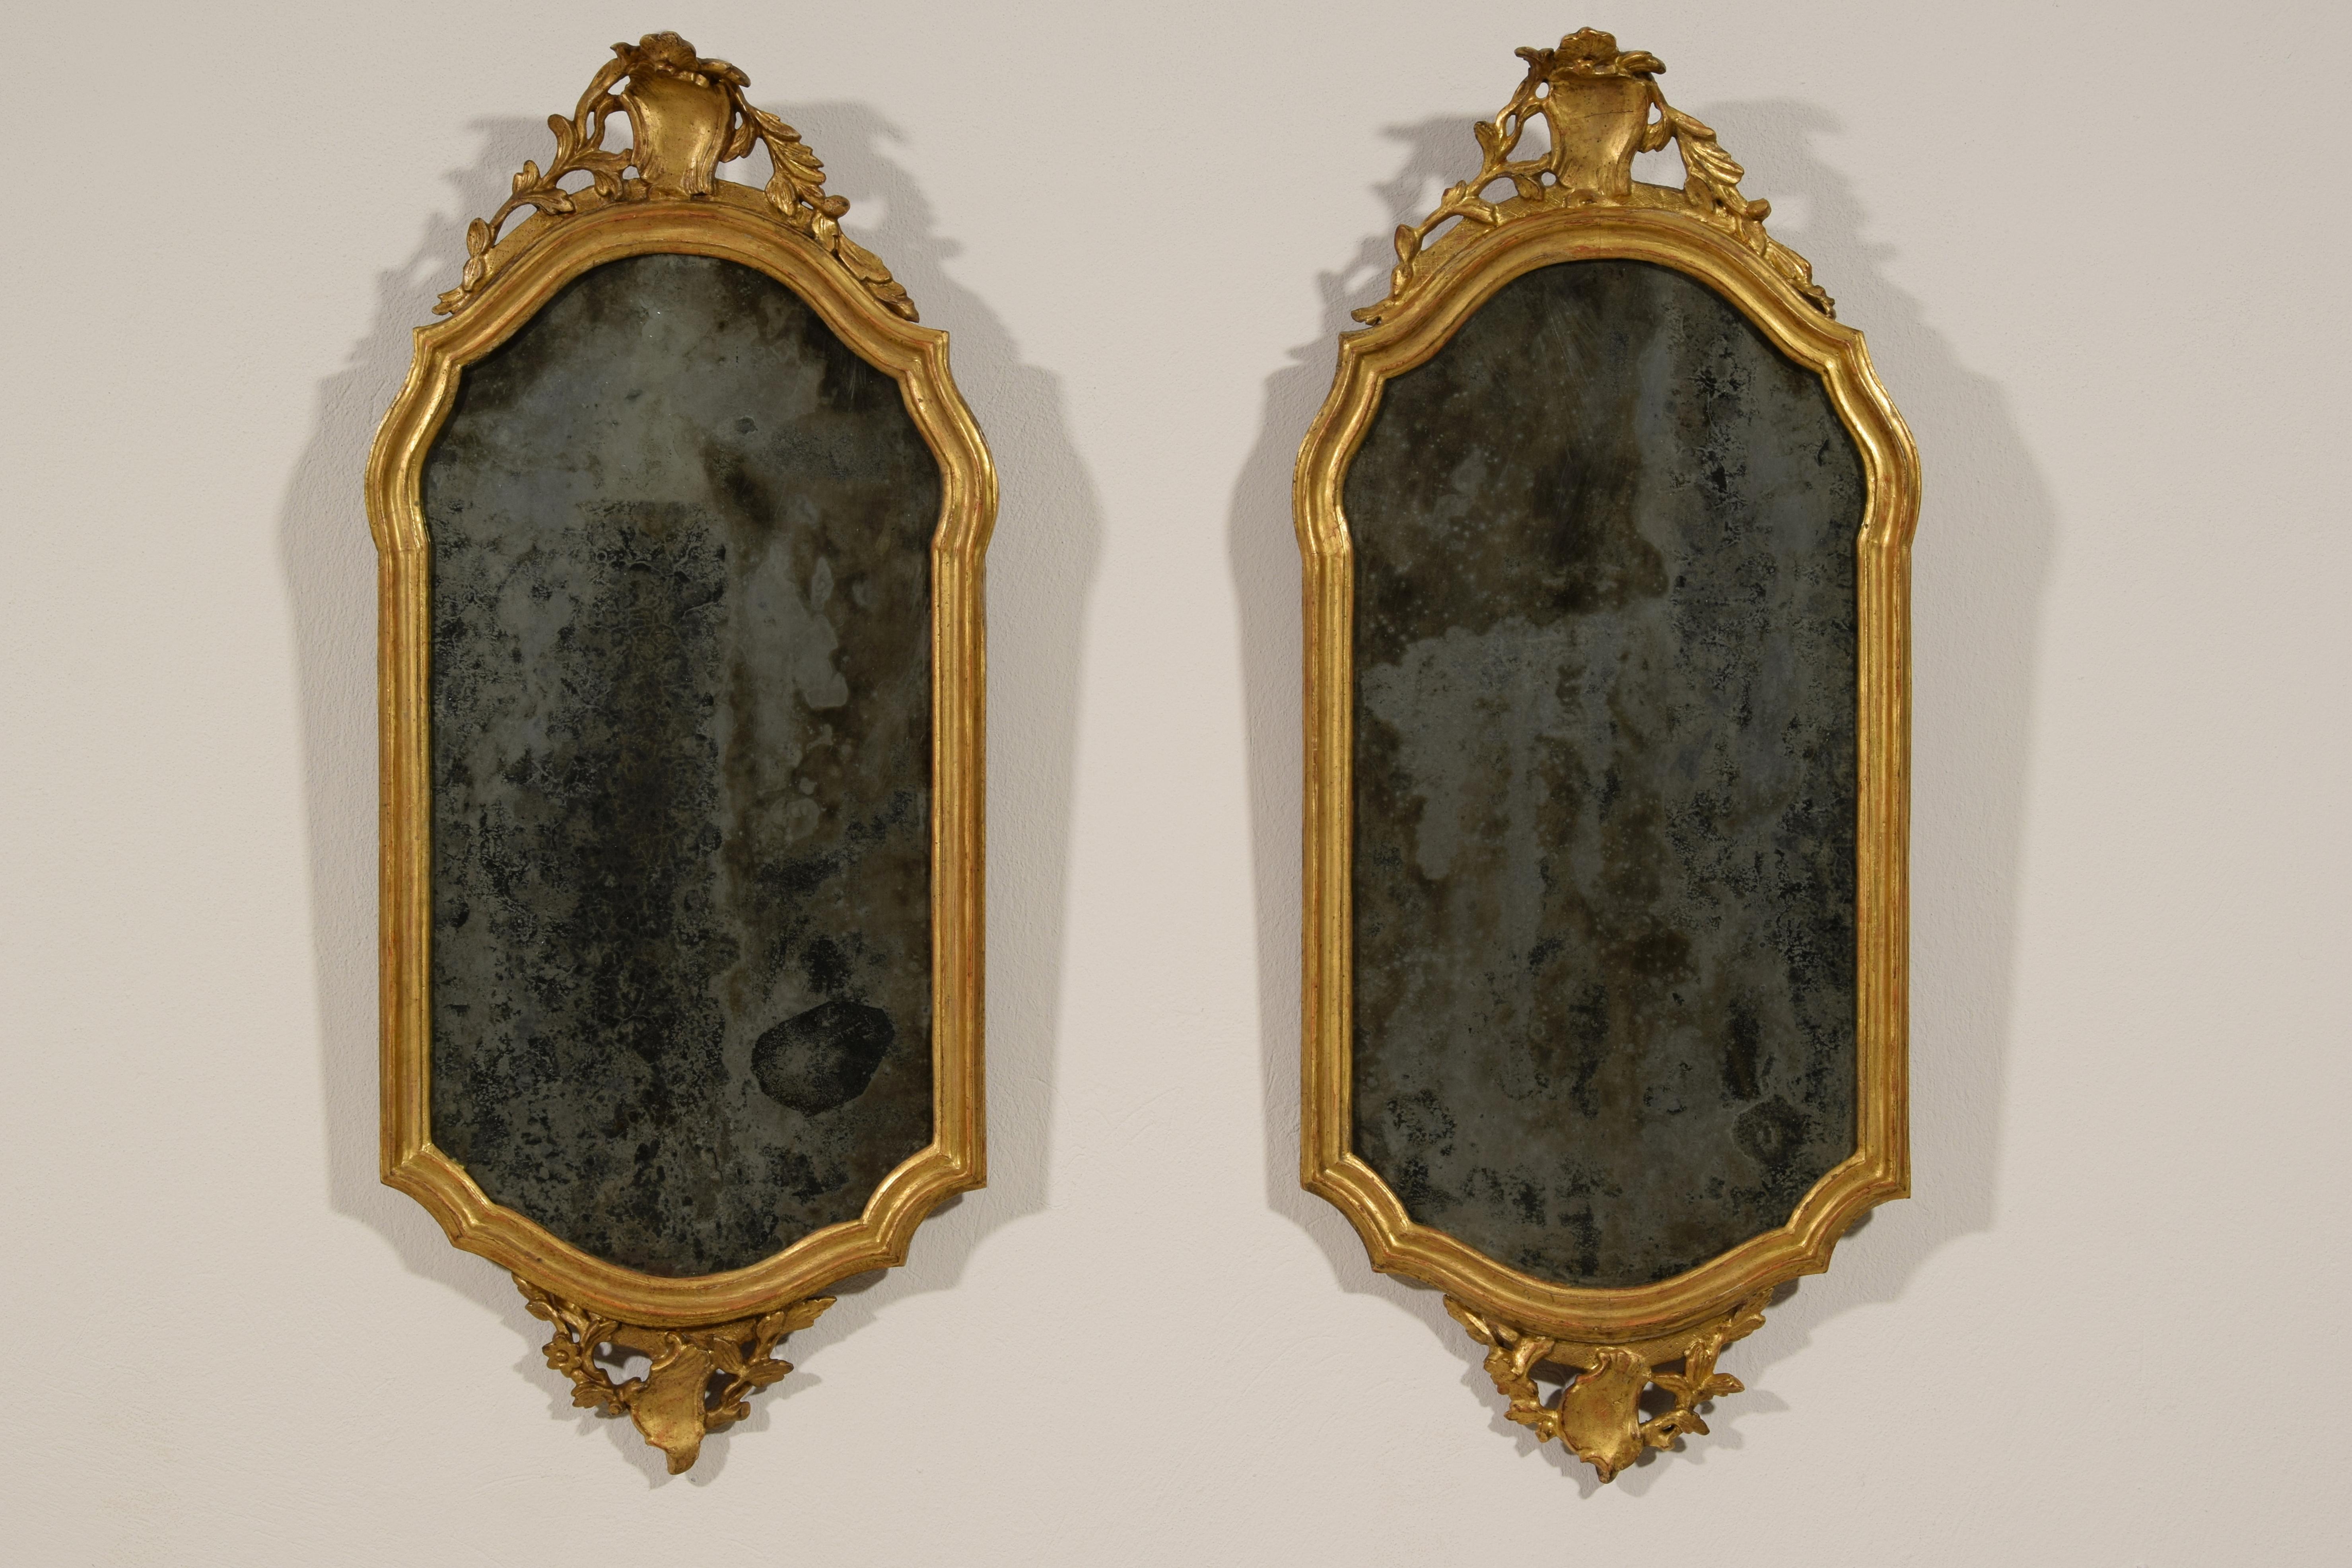 18th century, pair of Italian carved and giltwood mirrors
The pair of mirrors was made in Venice, Italy, around the middle of the eighteenth century, Louis XV era.
The carved and golden wooden frame, oblong, has a mixed pattern with mouldings